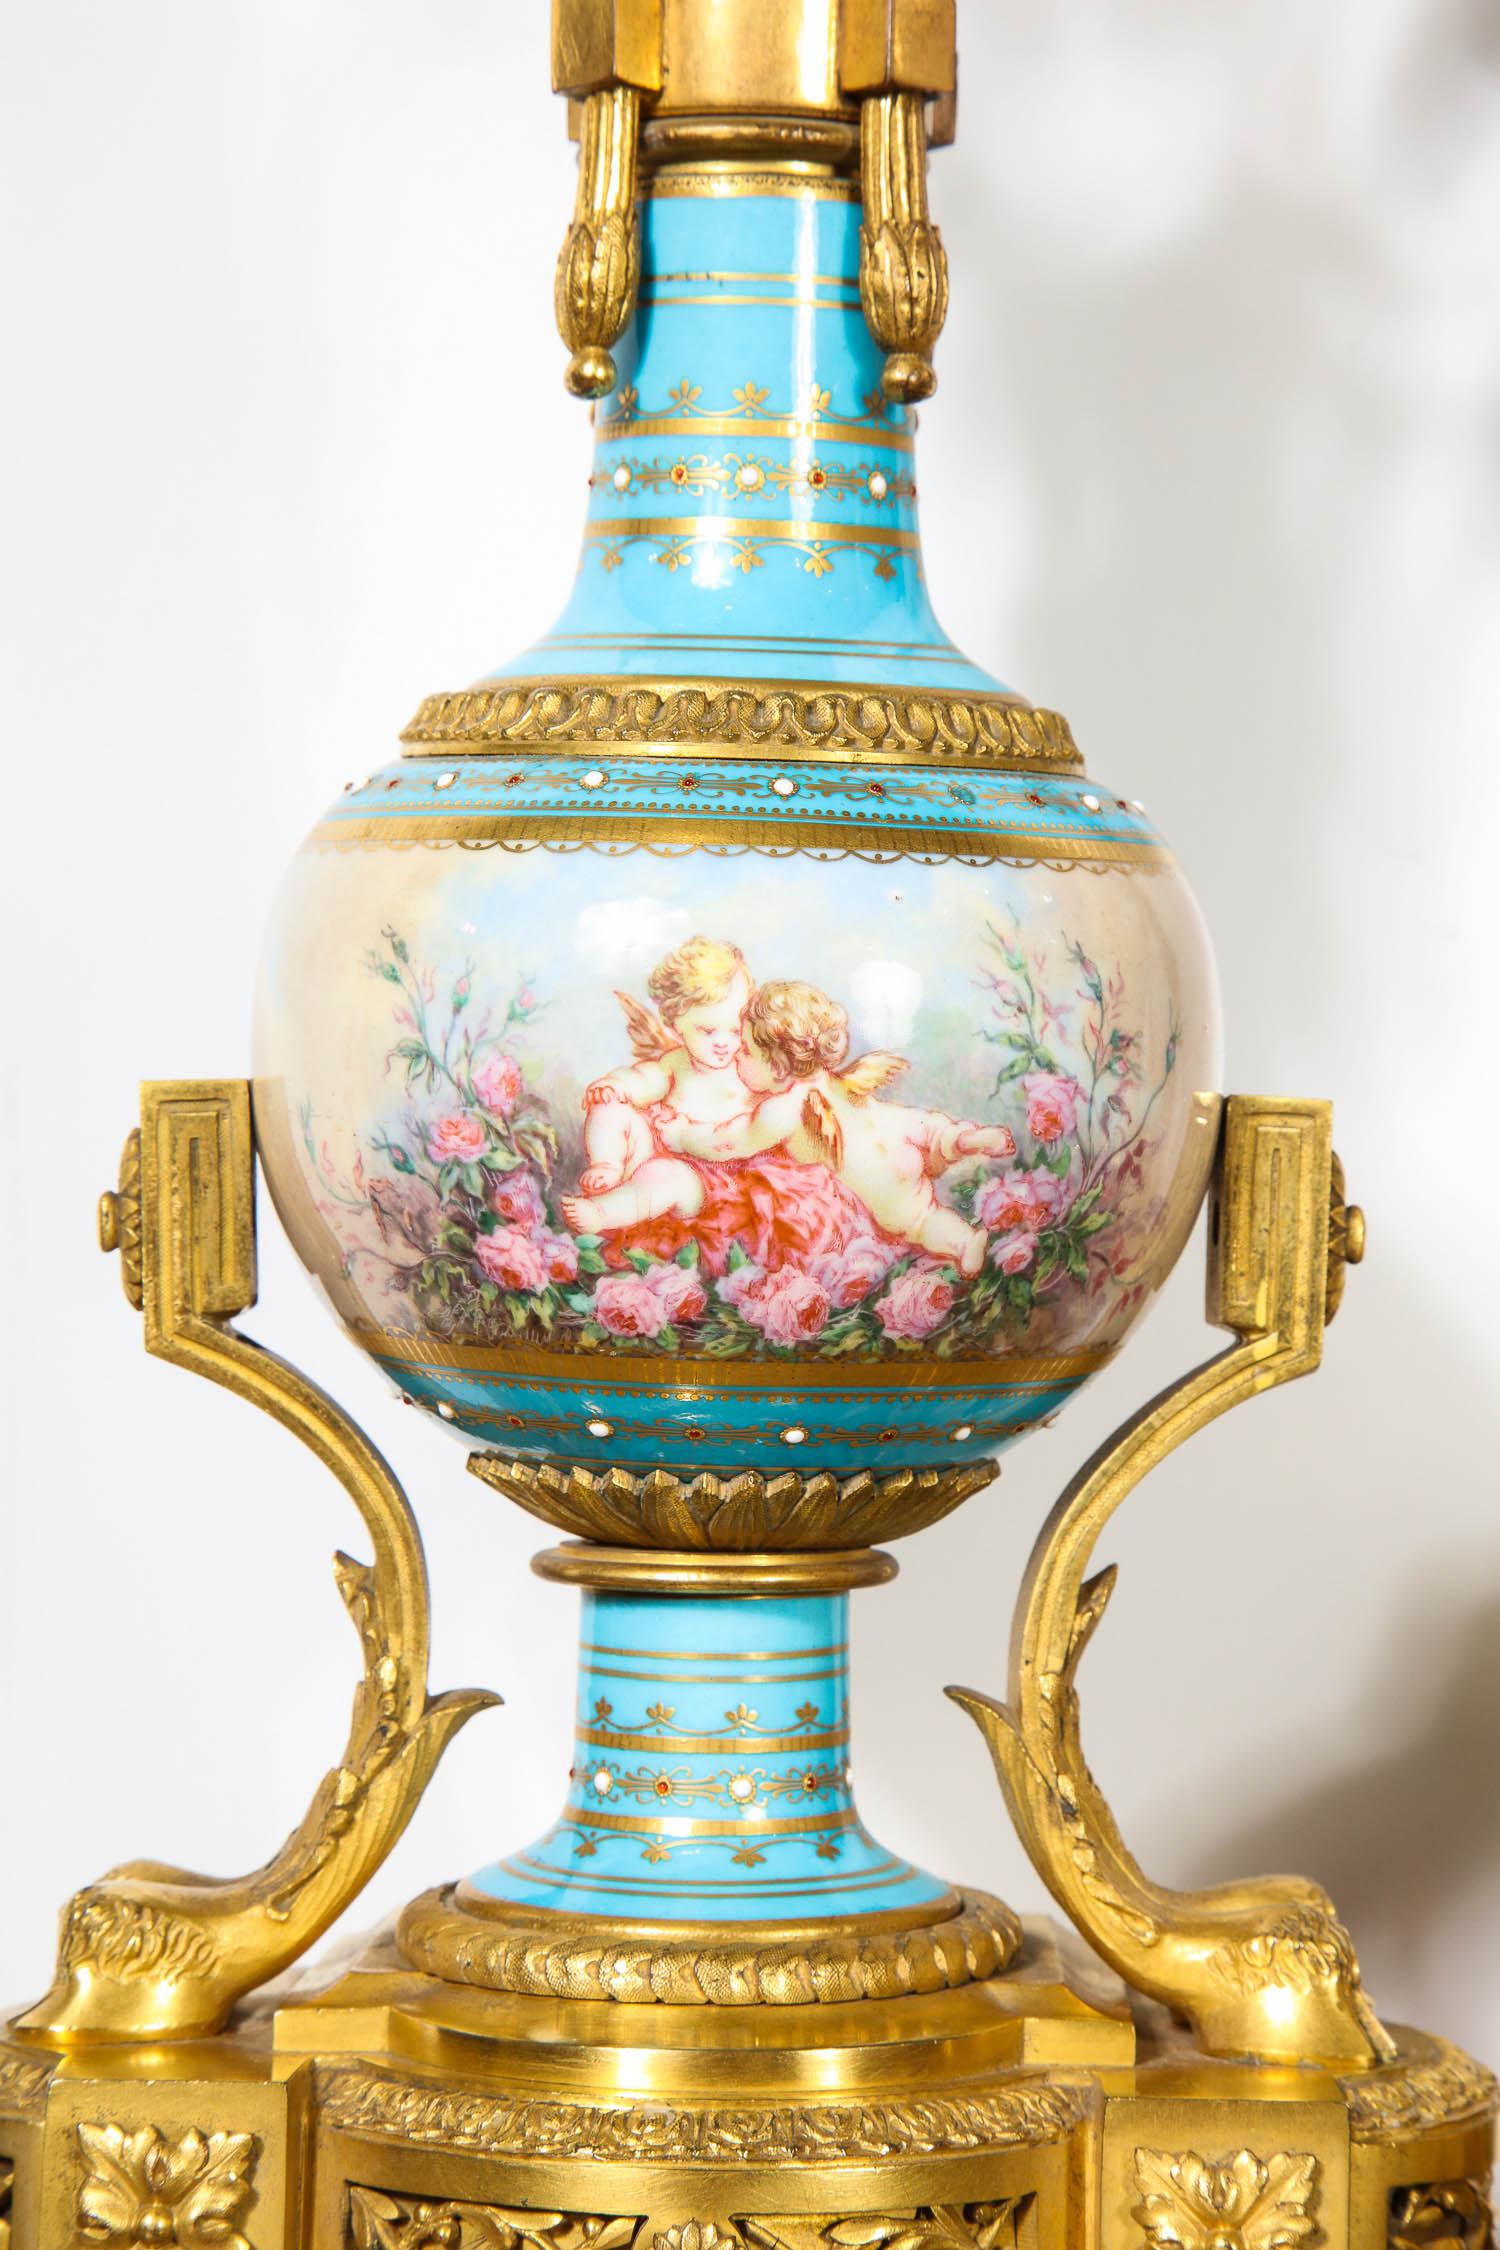 Exceptional French Ormolu-Mounted Turquoise Jeweled Sevres Porcelain Clock Set 1